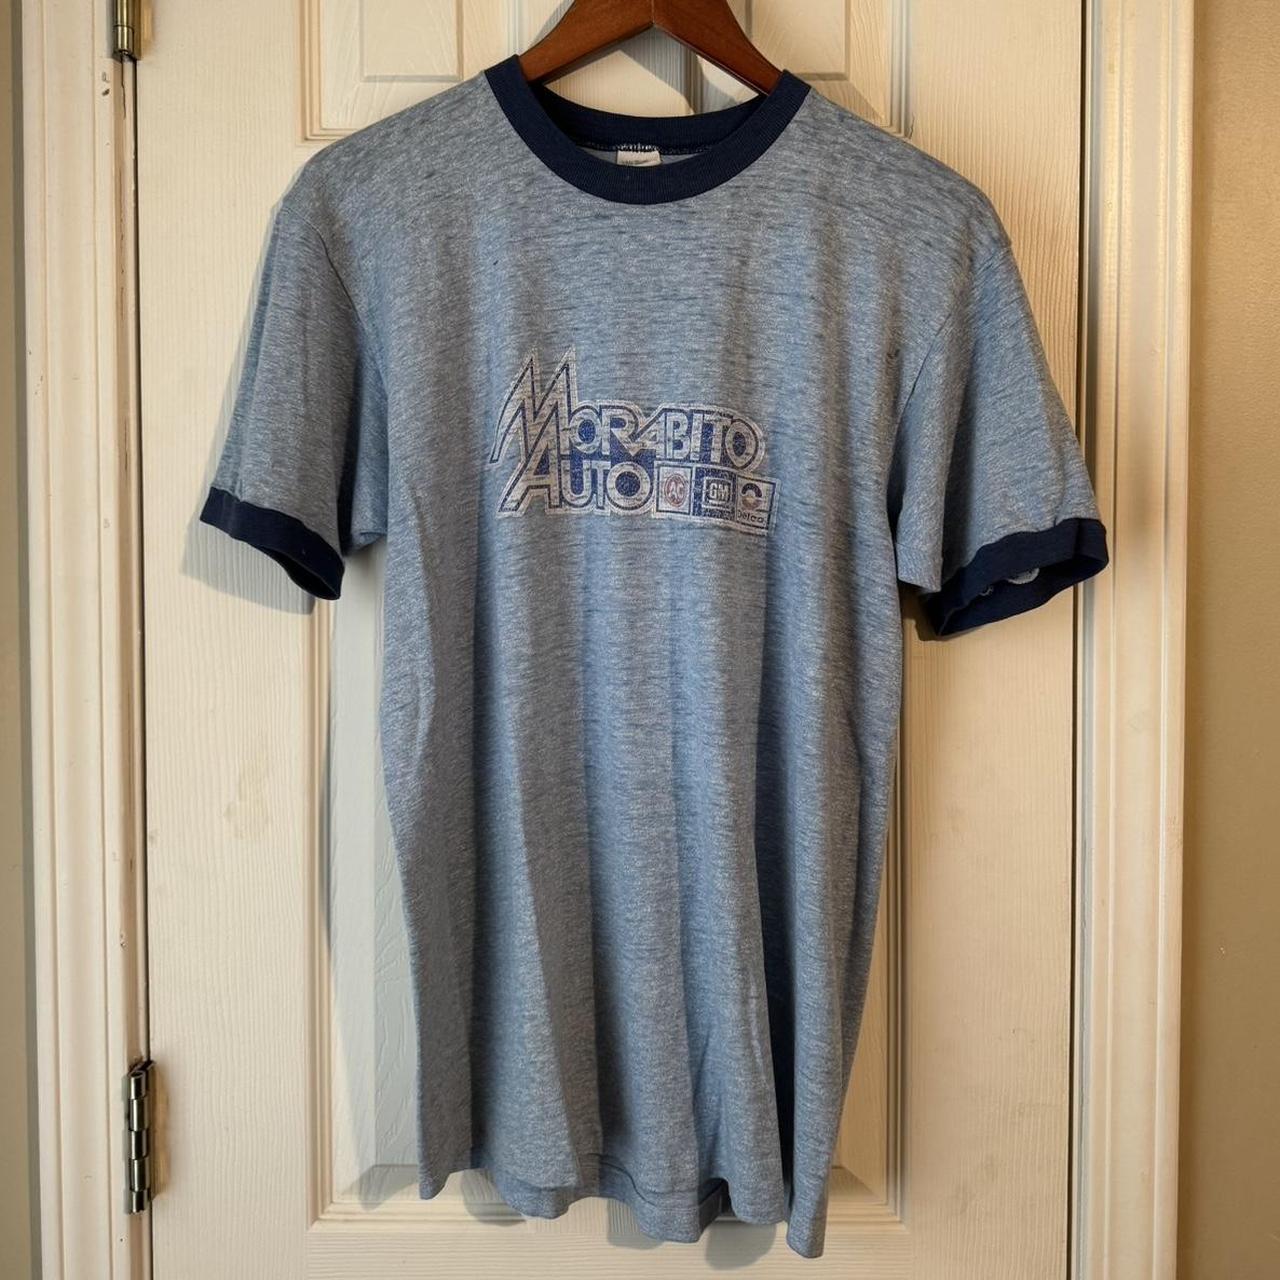 Towncraft morabito auto ringer Size XL fits like a... - Depop